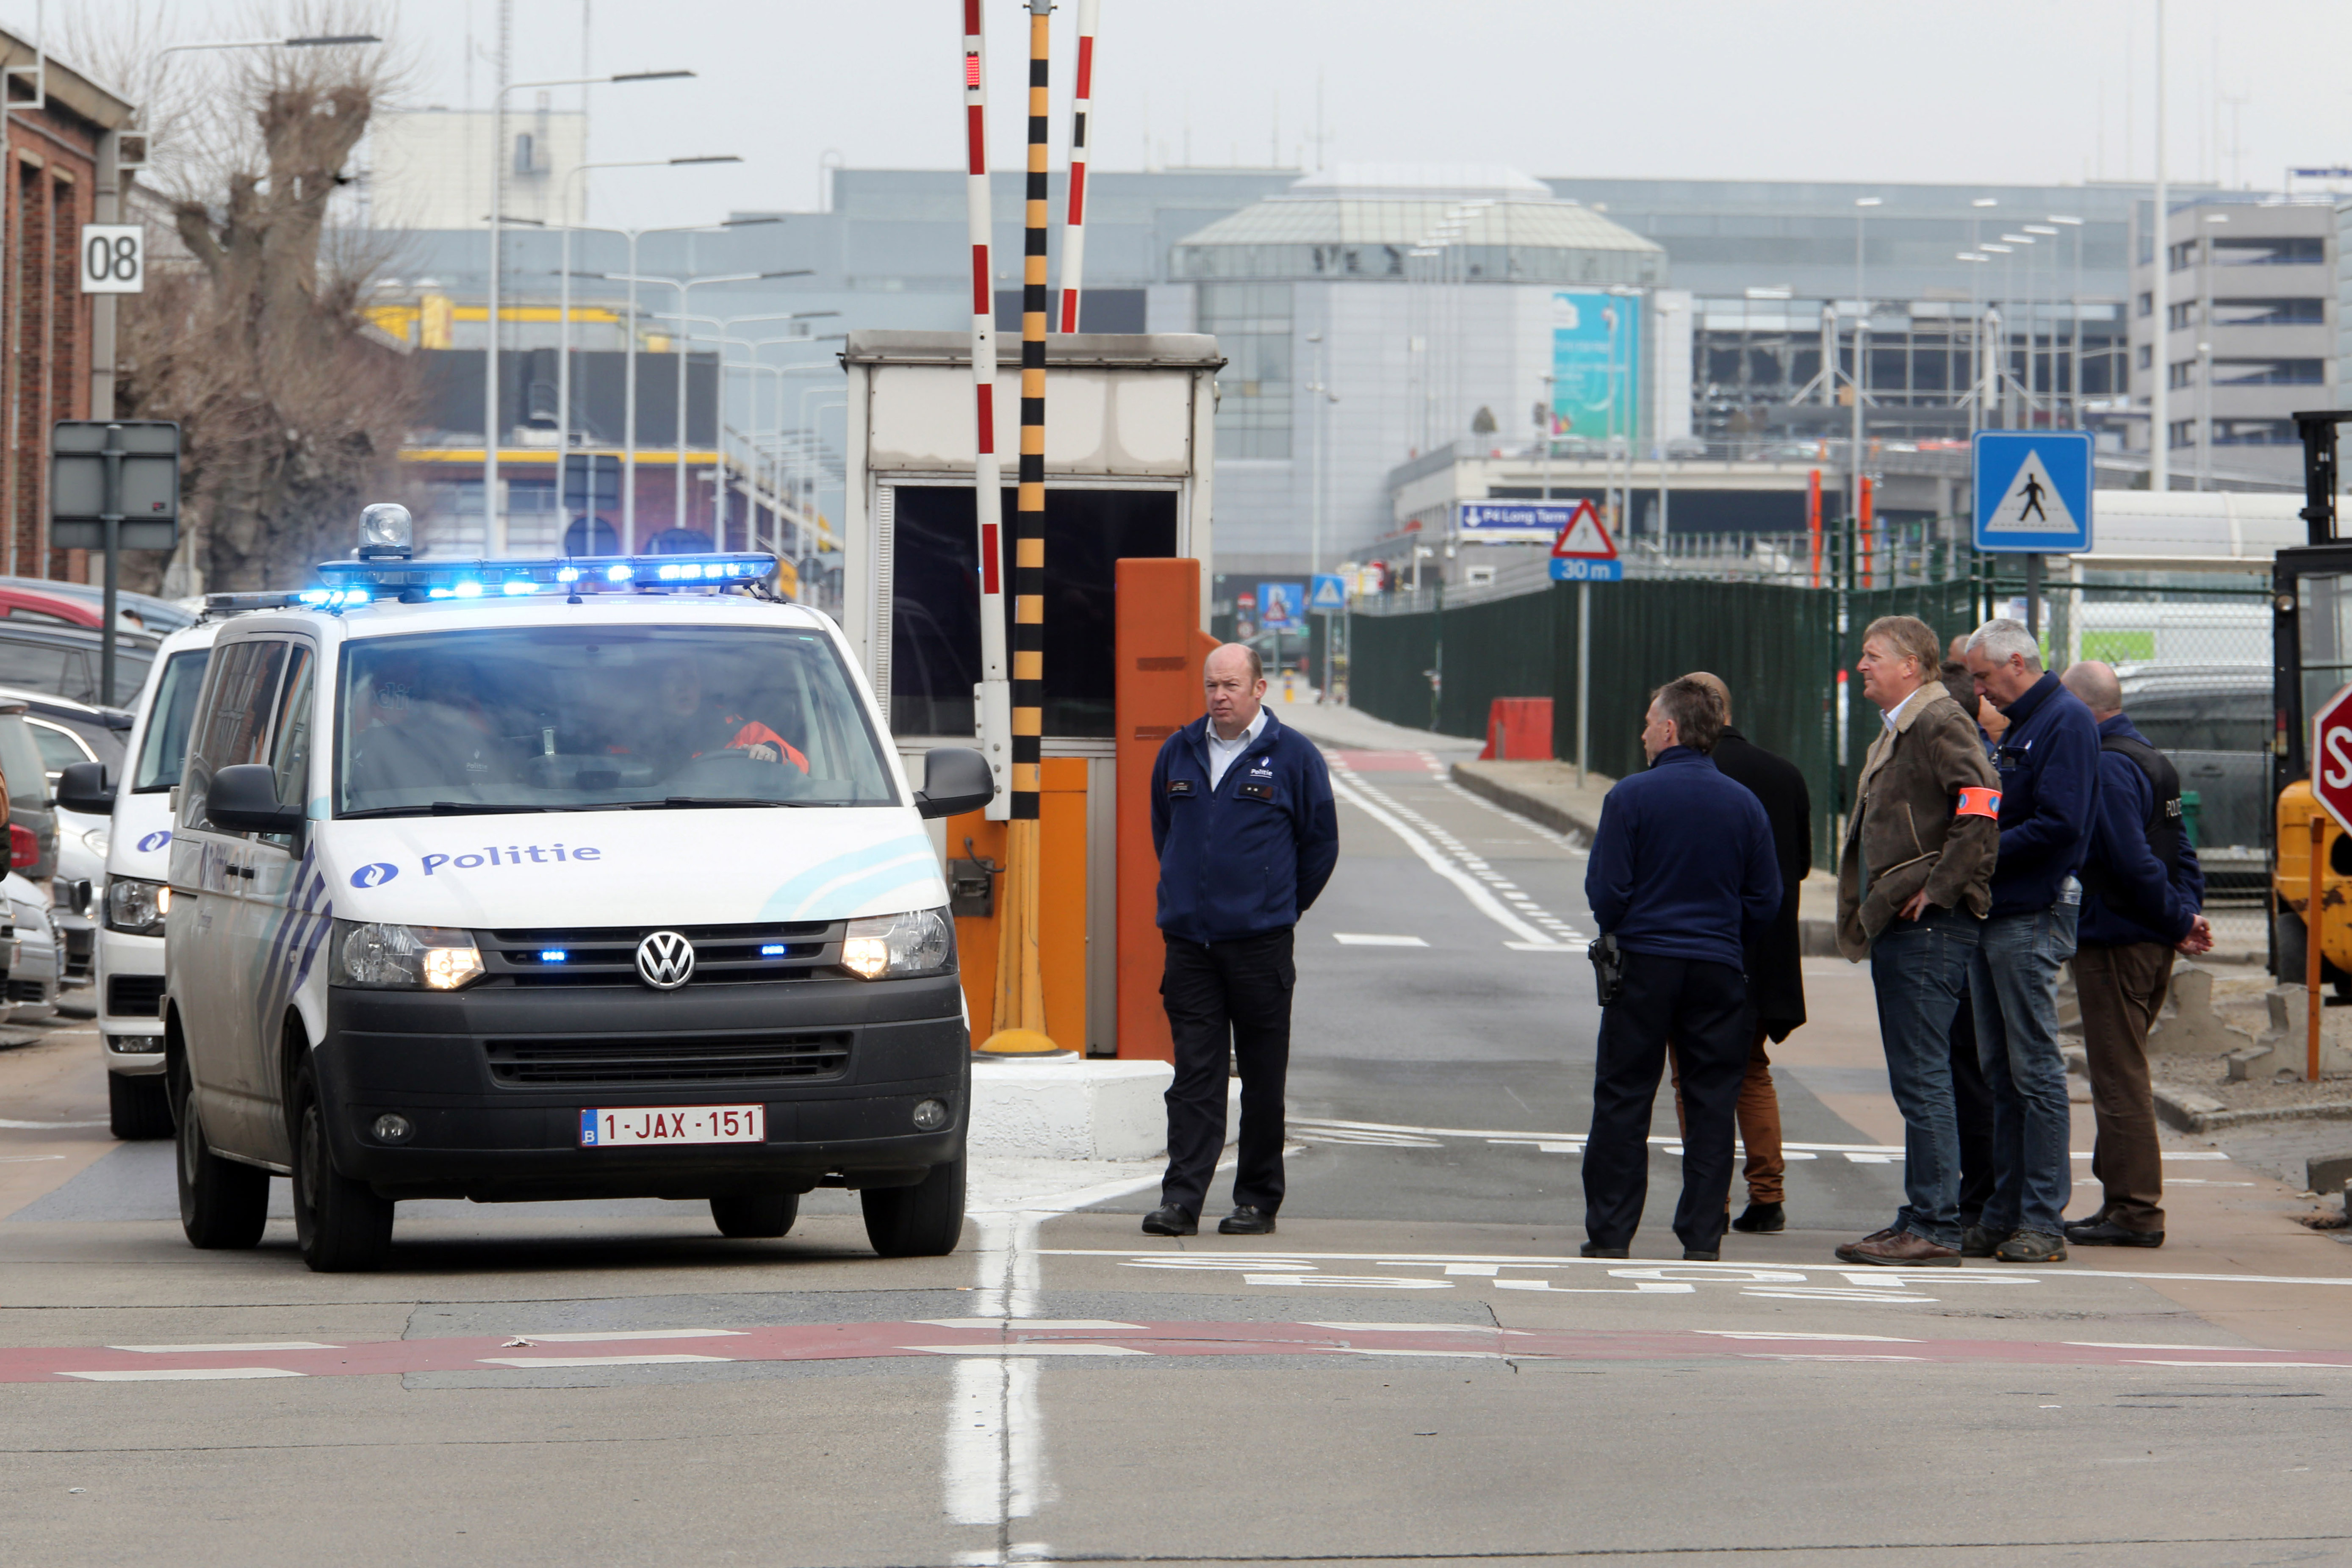 Police vehicles leave Zaventem Bruxelles International Airport. (Getty)